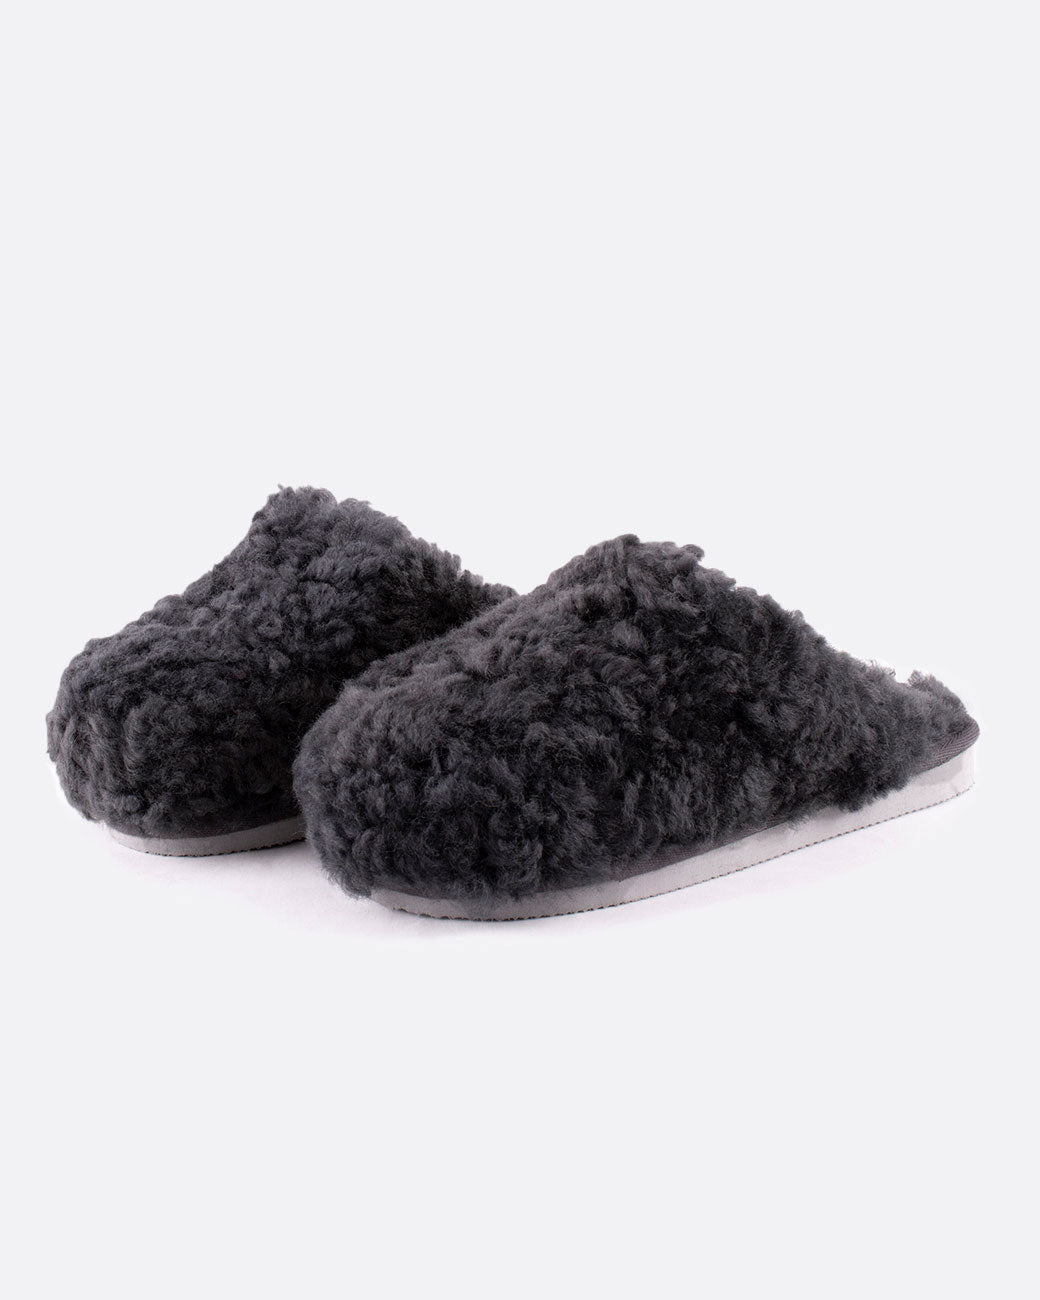 Jenny sheepskin slippers in charcoal gray, shown from the side